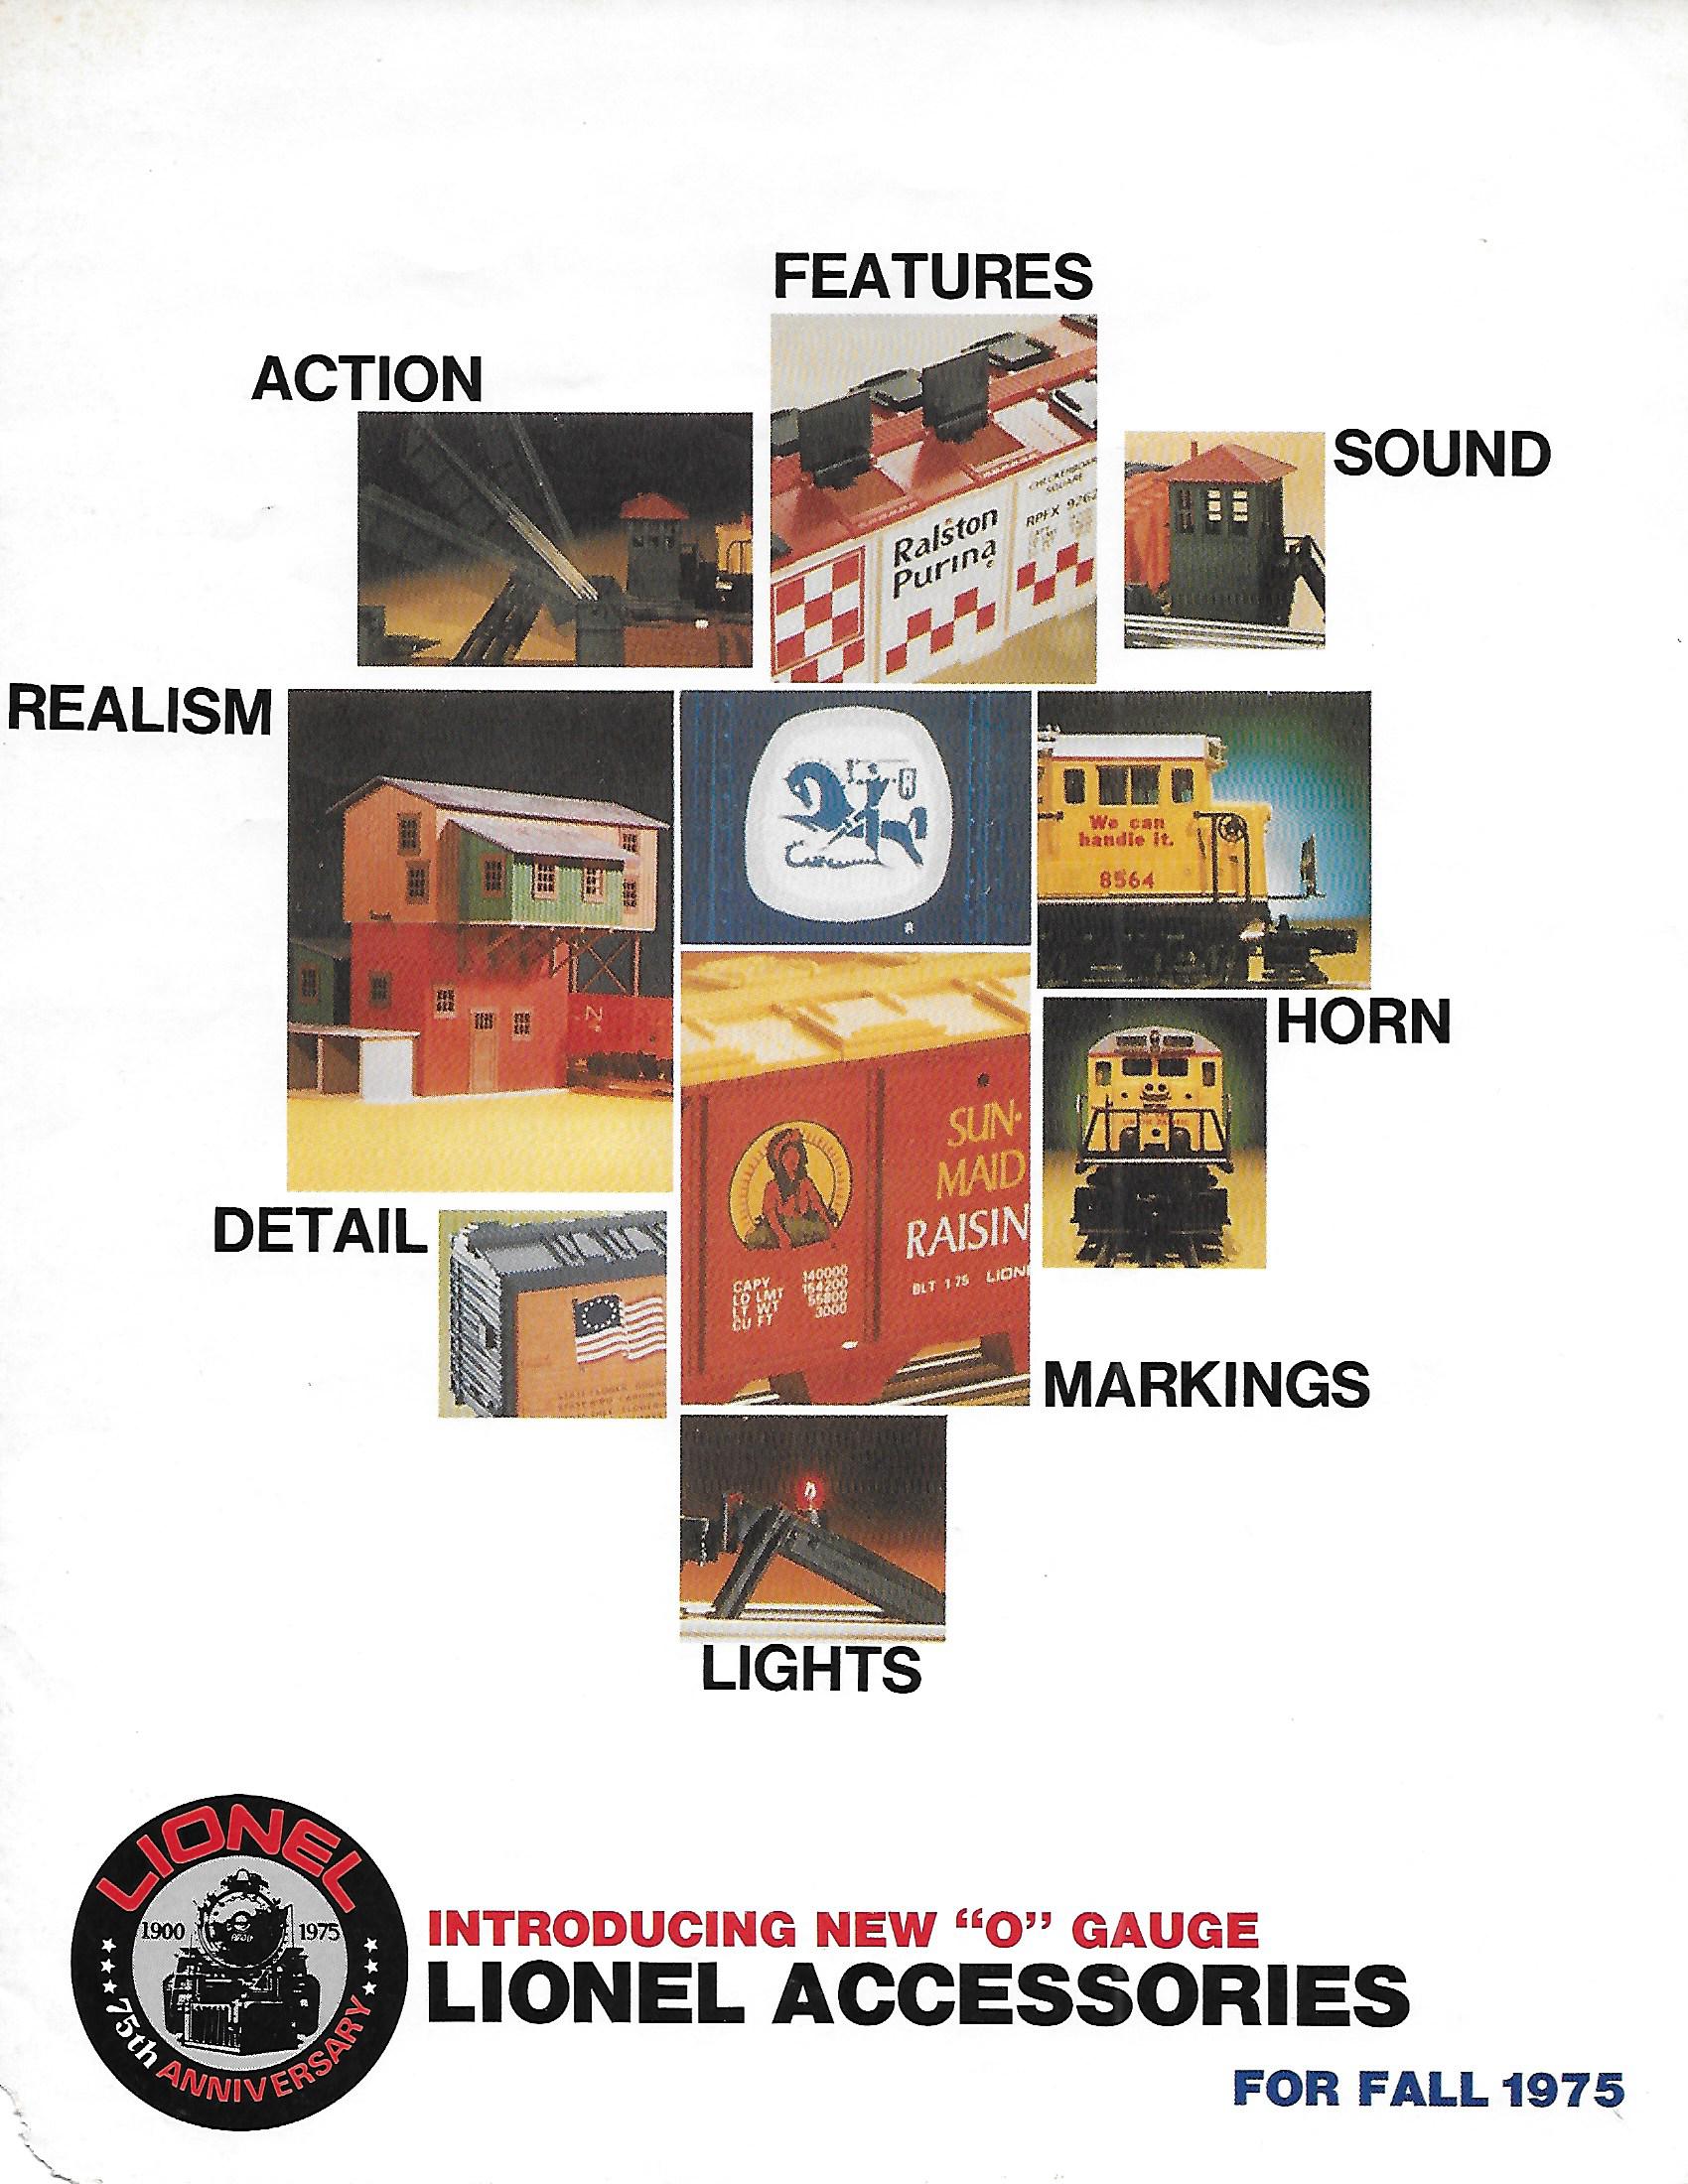 Lionel 1975 Accessories for Fall 1975 Flier image